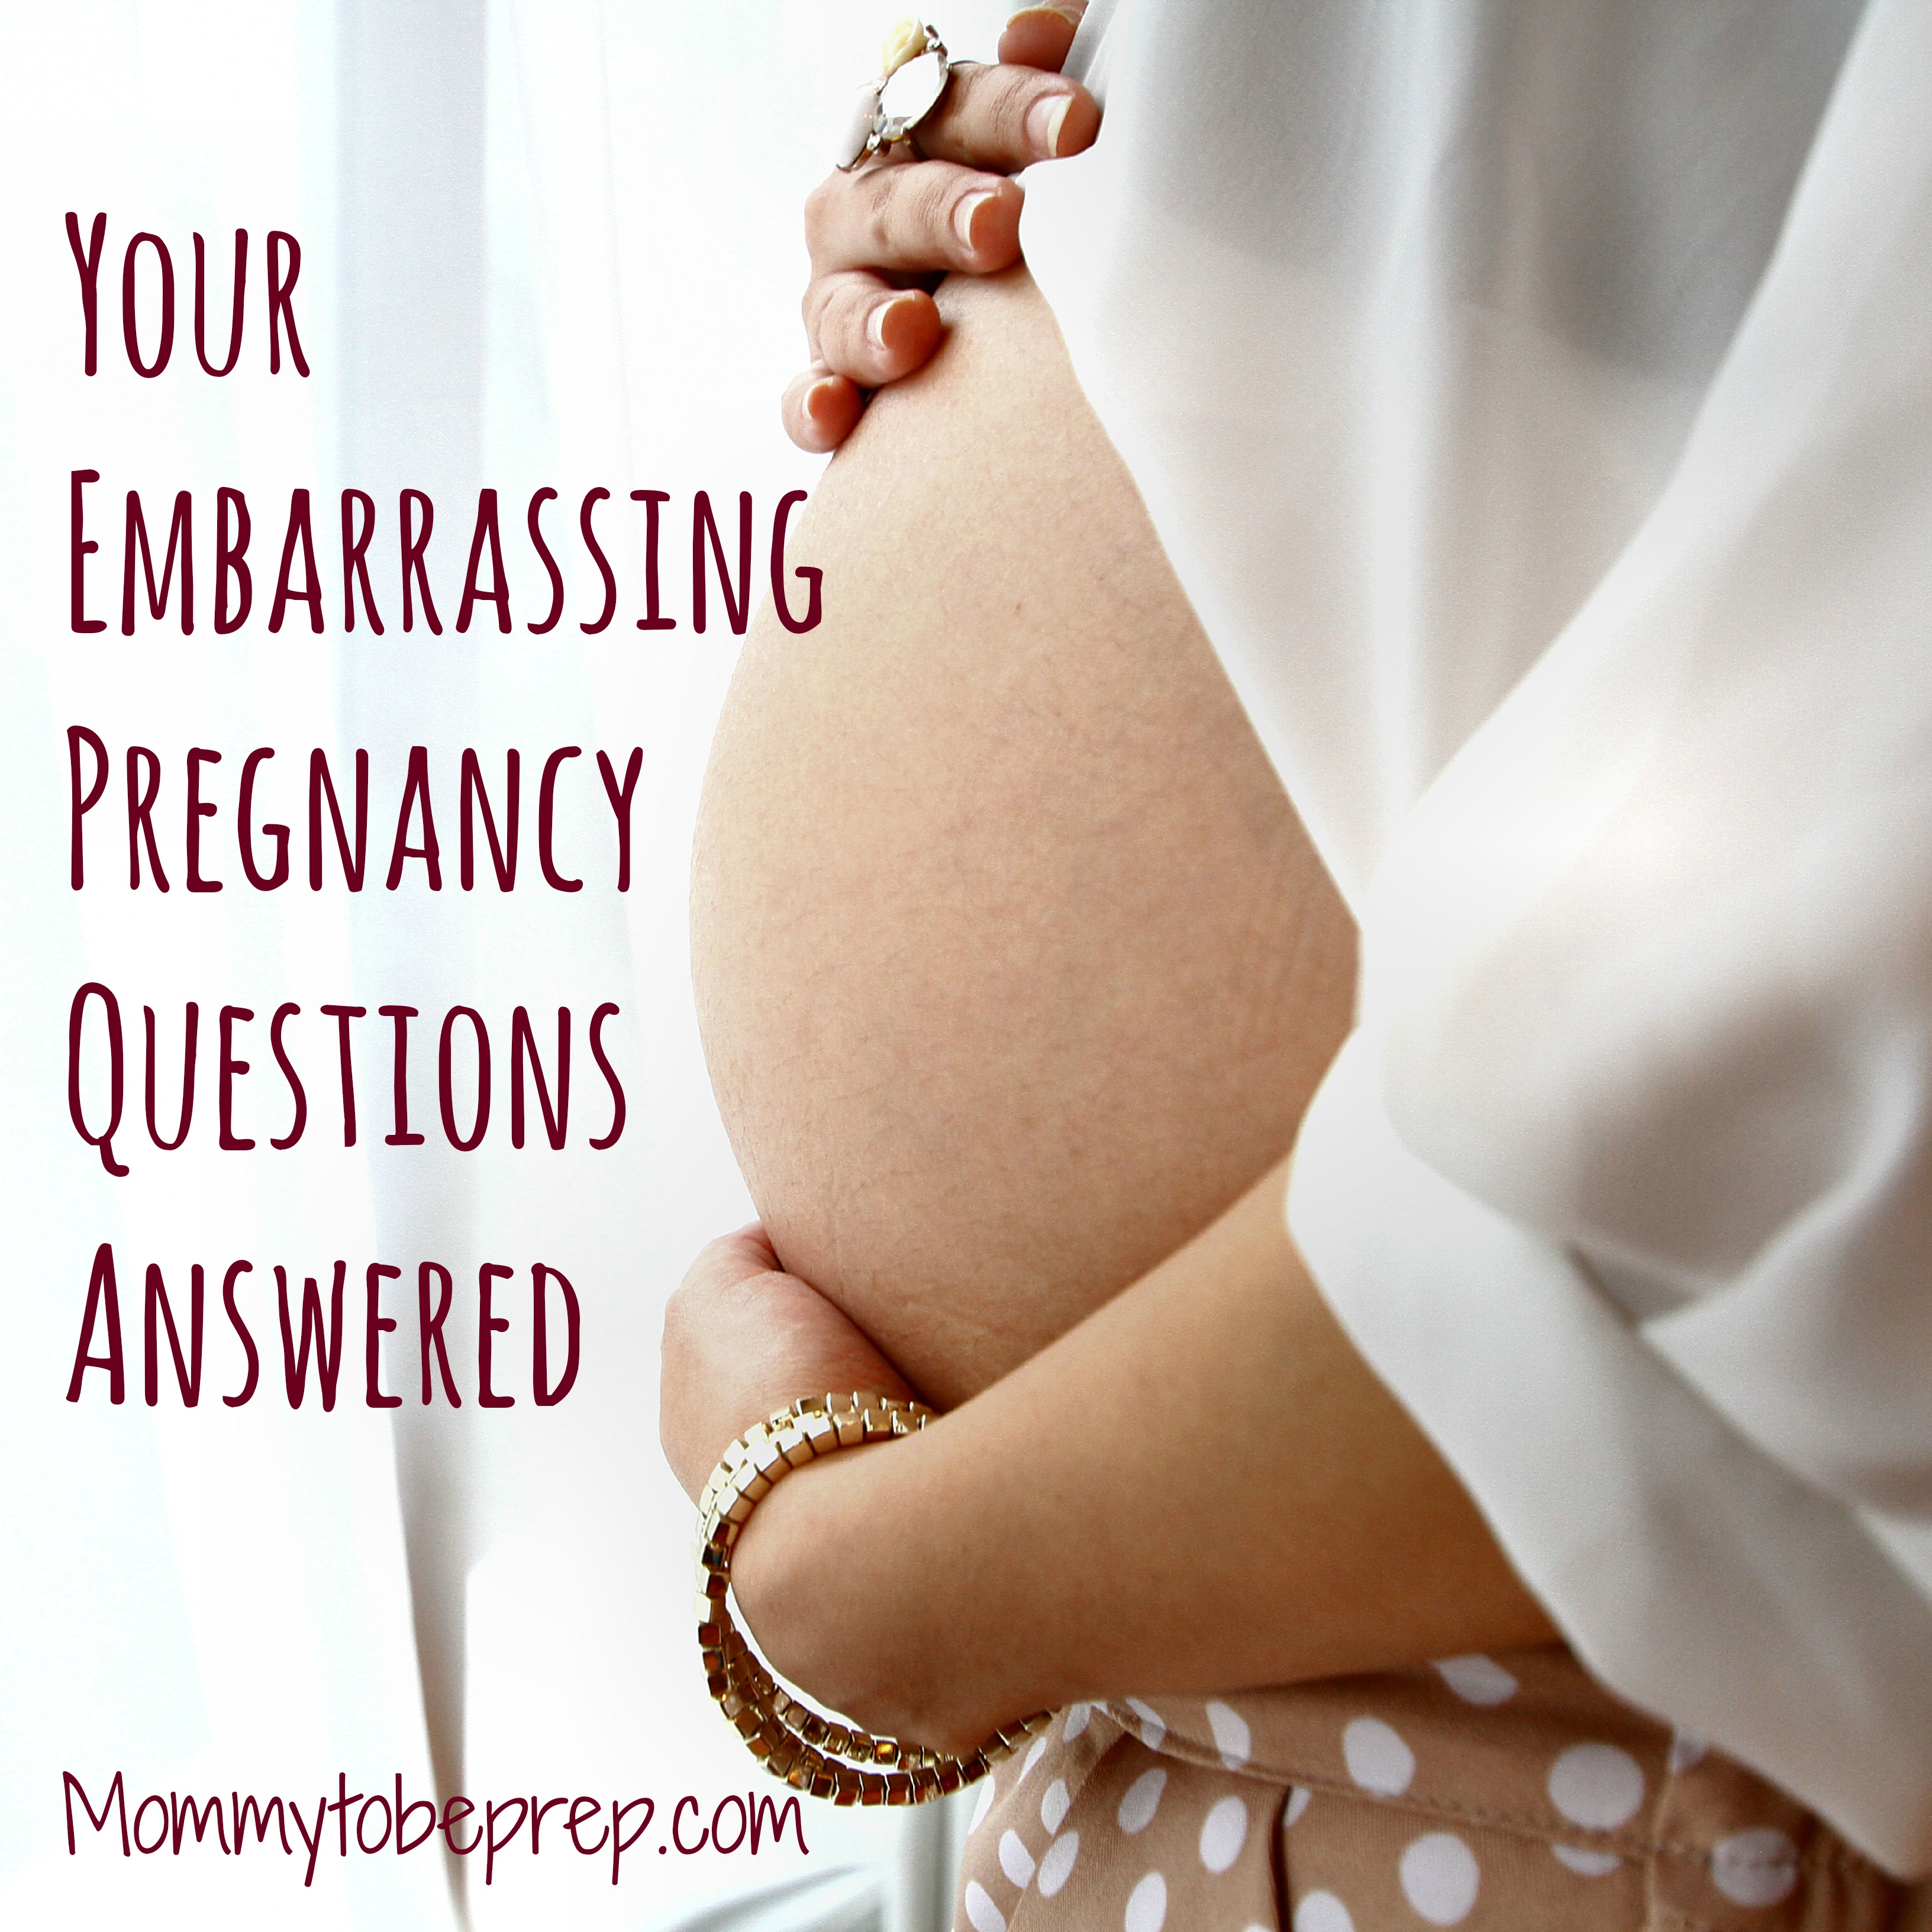 Your Embarrassing Pregnancy Questions Answered